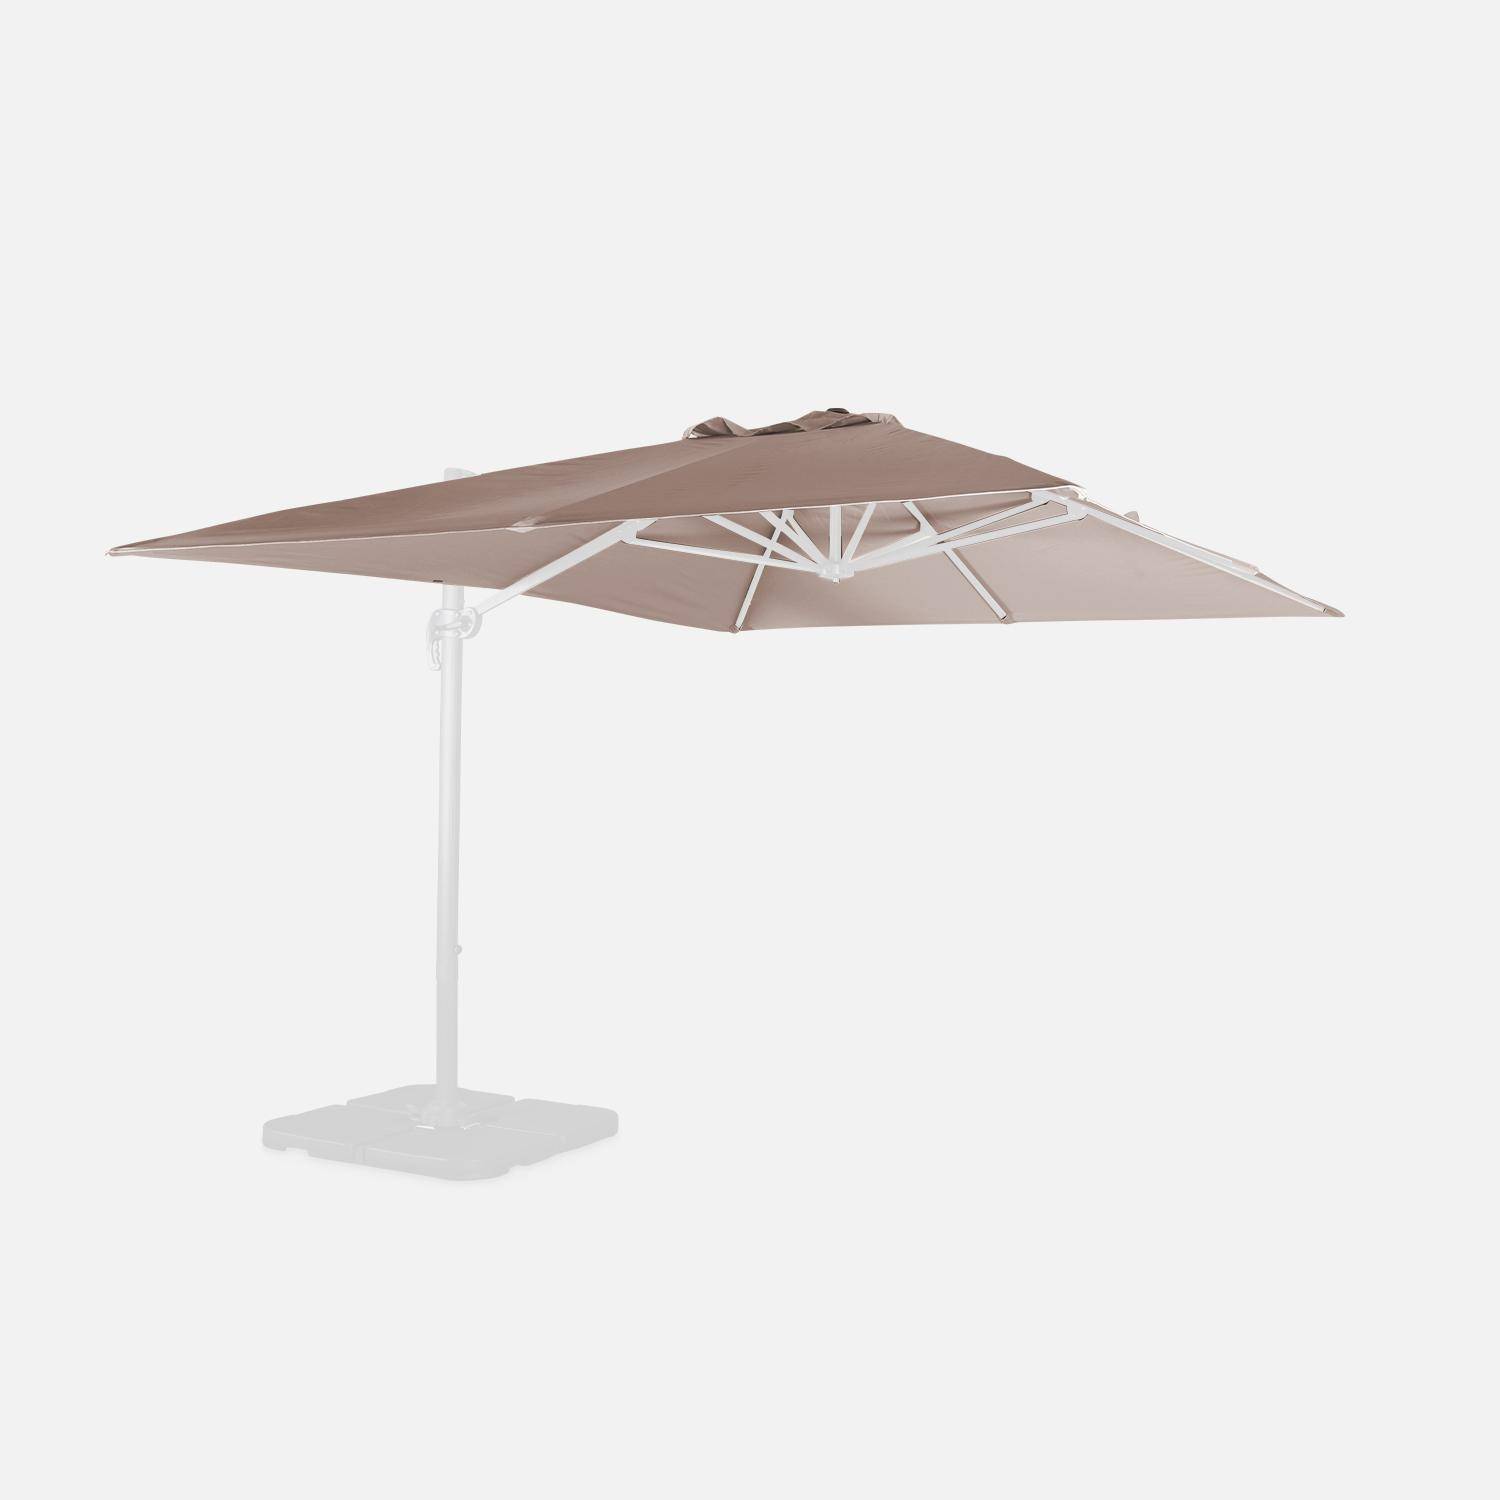 Taupe parasol cloth for 3x4m Wimereux parasol - spare cloth, replacement cloth,sweeek,Photo1